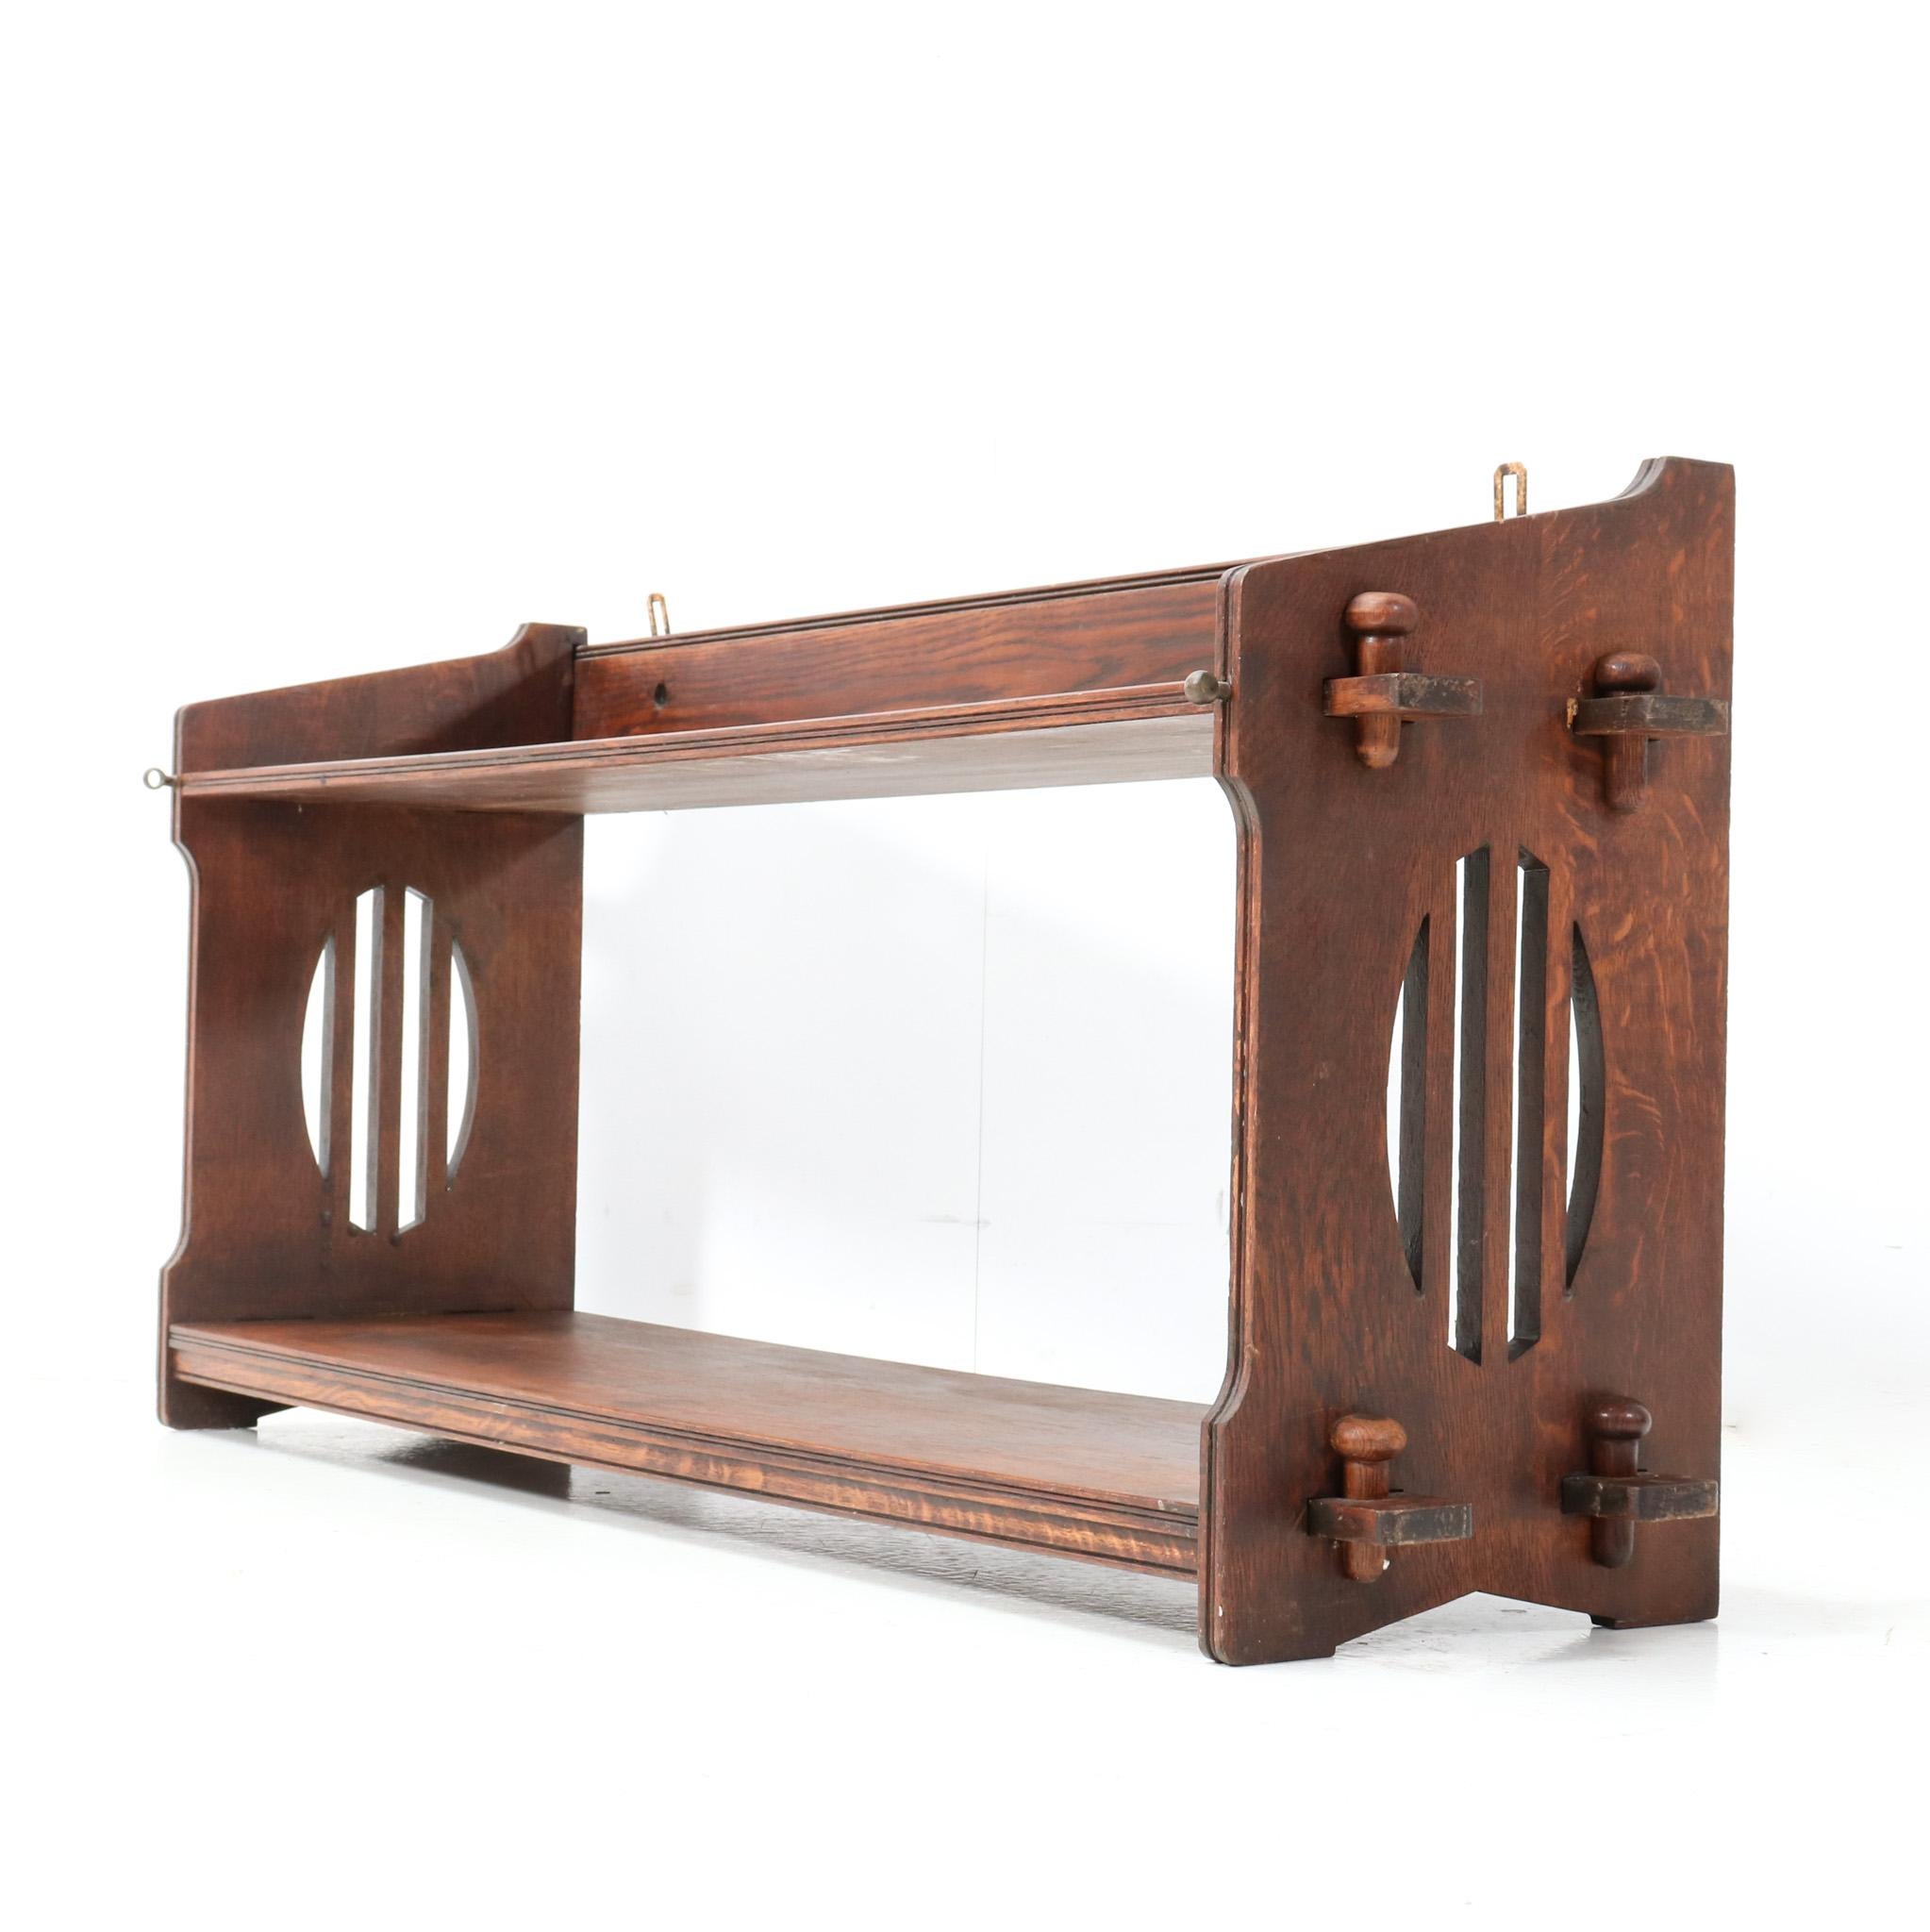 French Oak Arts & Crafts Art Nouveau Magazine Rack or Book Rack by Aug. Zeiss & Cie. For Sale